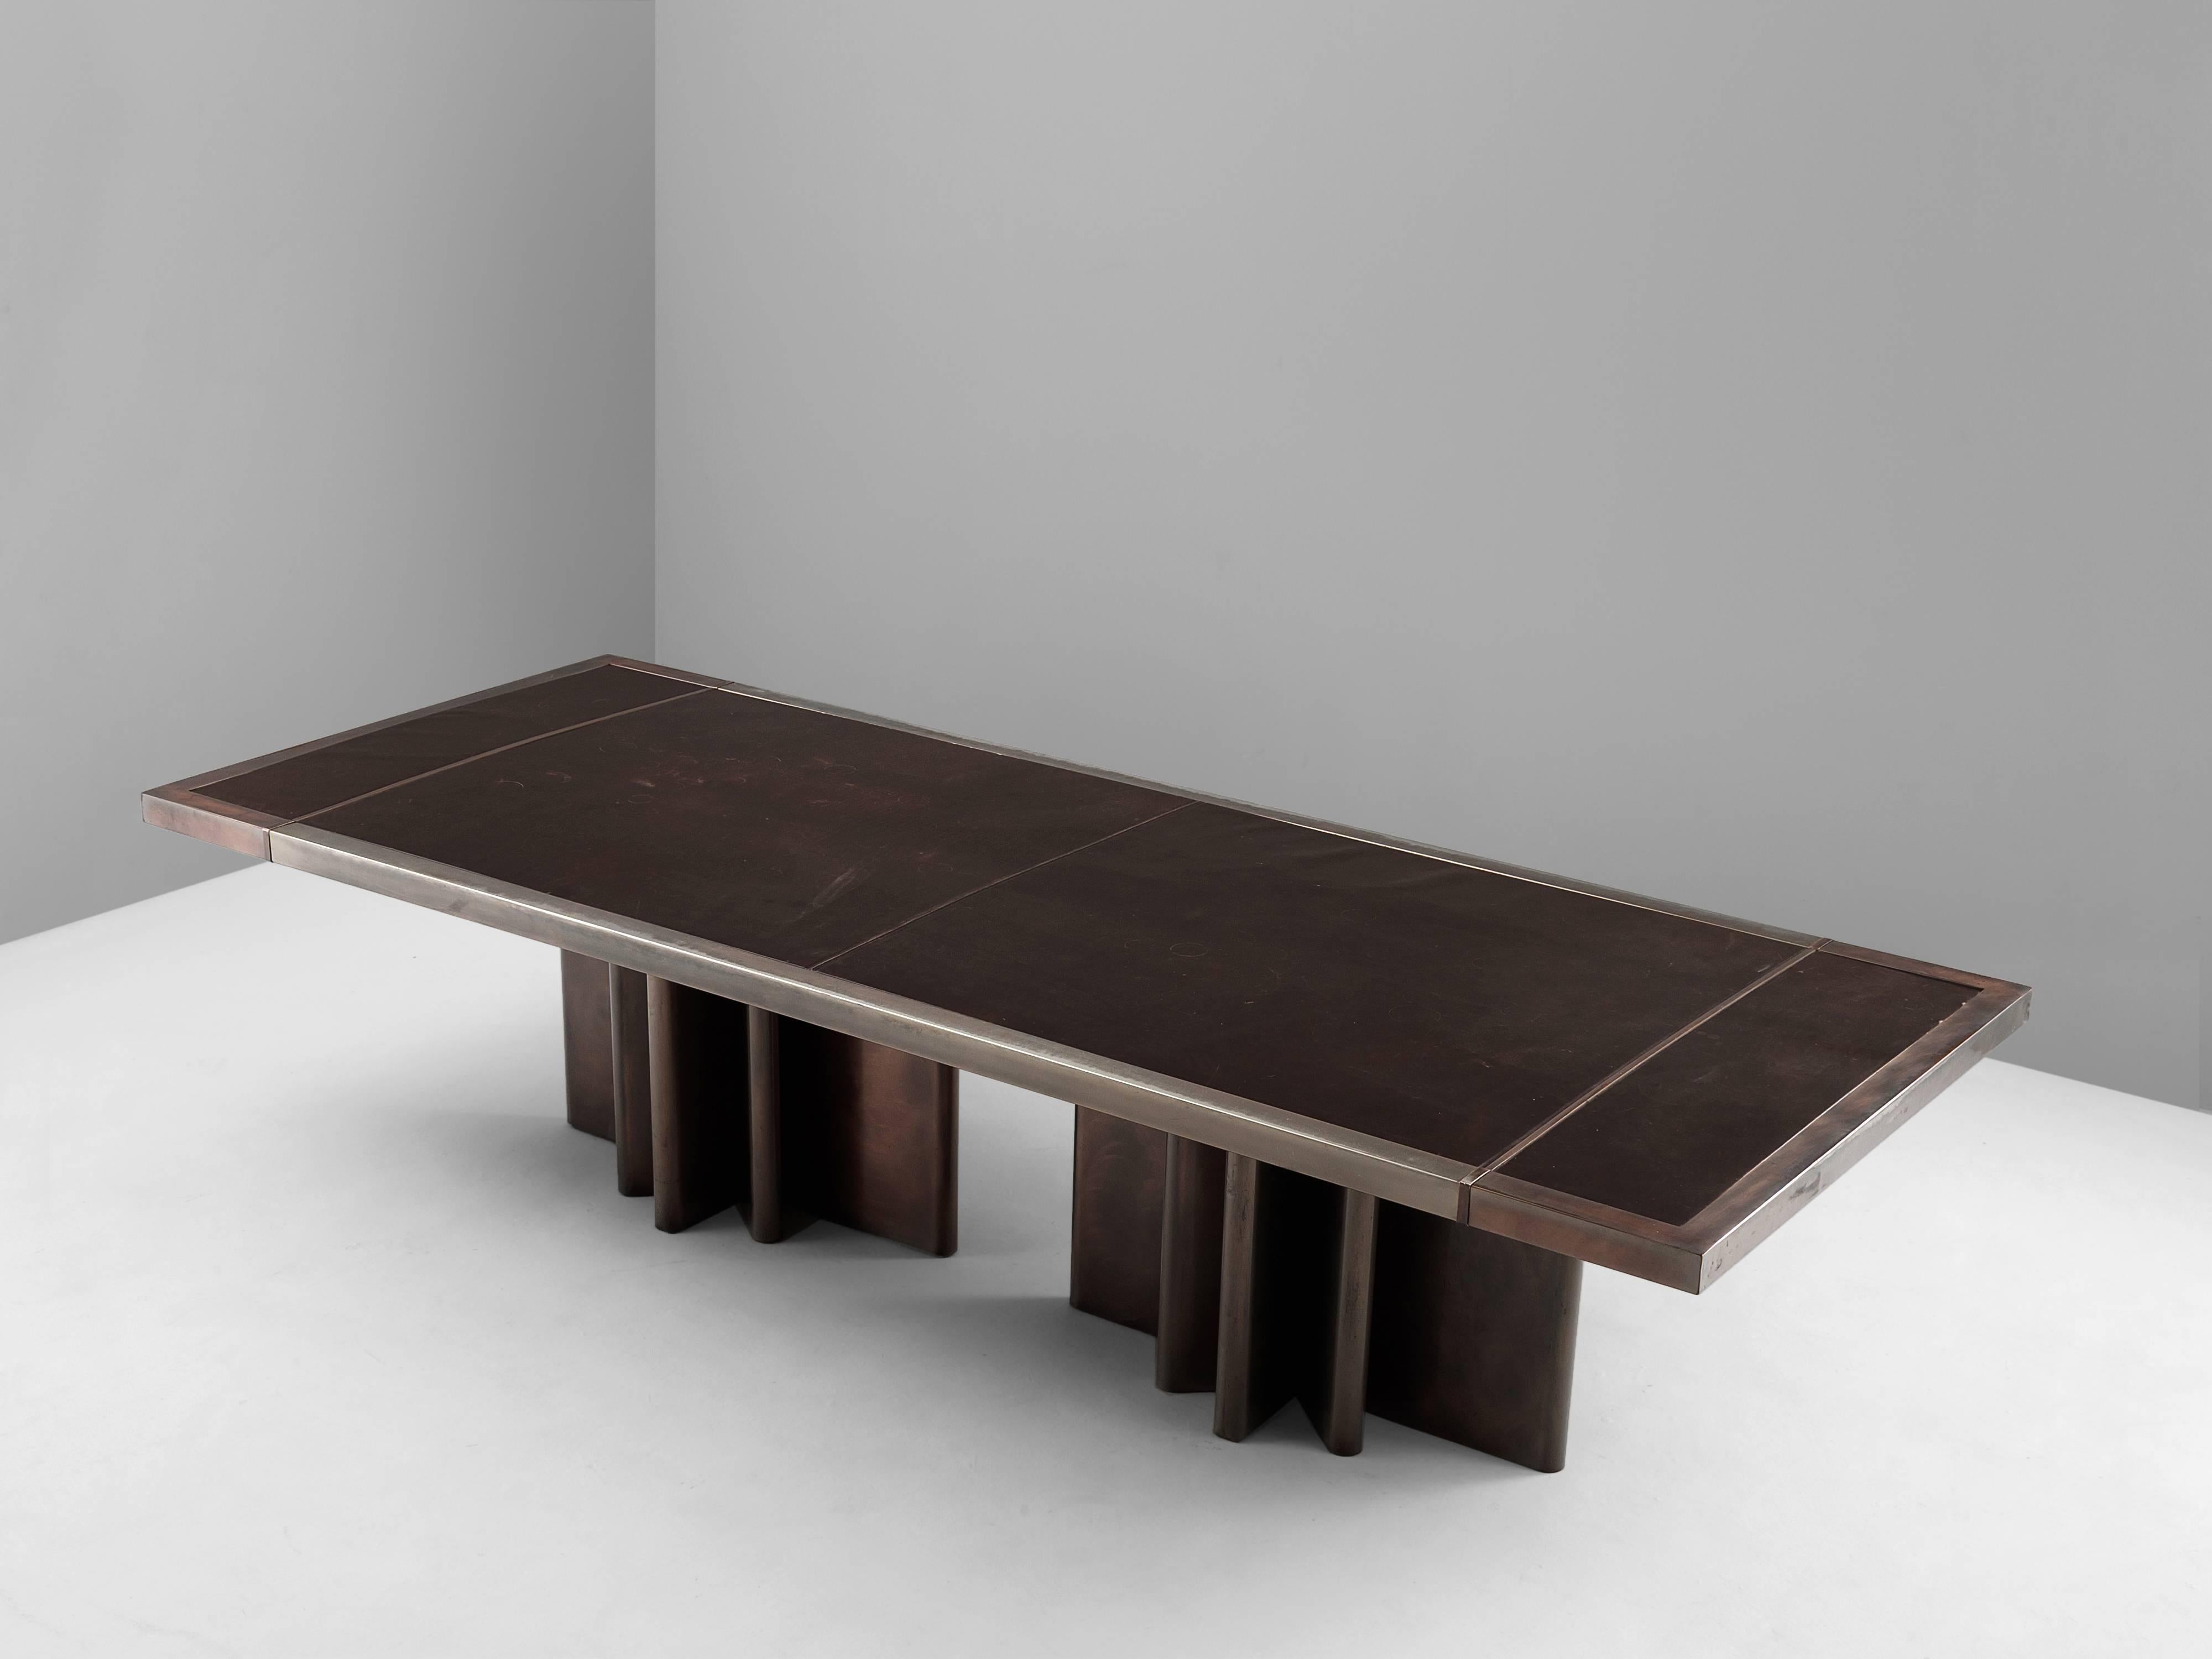 Conference table, in leather and metal, Belgium 1970s. 

Large conference table in metal wit dark brown leather top. Two metal legs in the shape of stars. The metal shows a nice copper colored patina which beautifully blends with the dark brown of